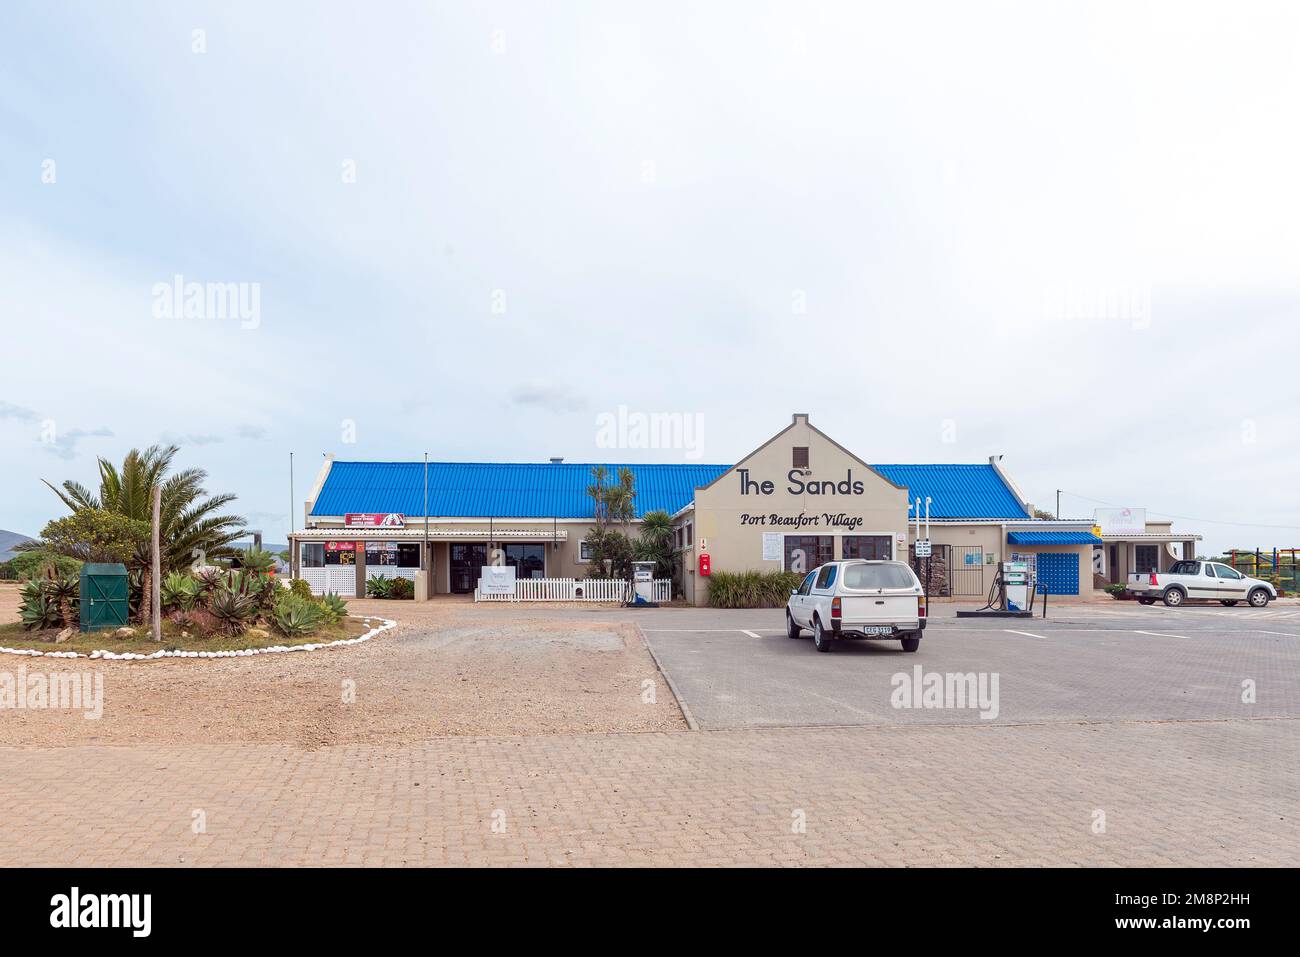 Witsand, South Africa - Sep 24, 2022: The Sands shopping centre at the entrance of Witsand and Port Beaufort. Vehicles are visble Stock Photo